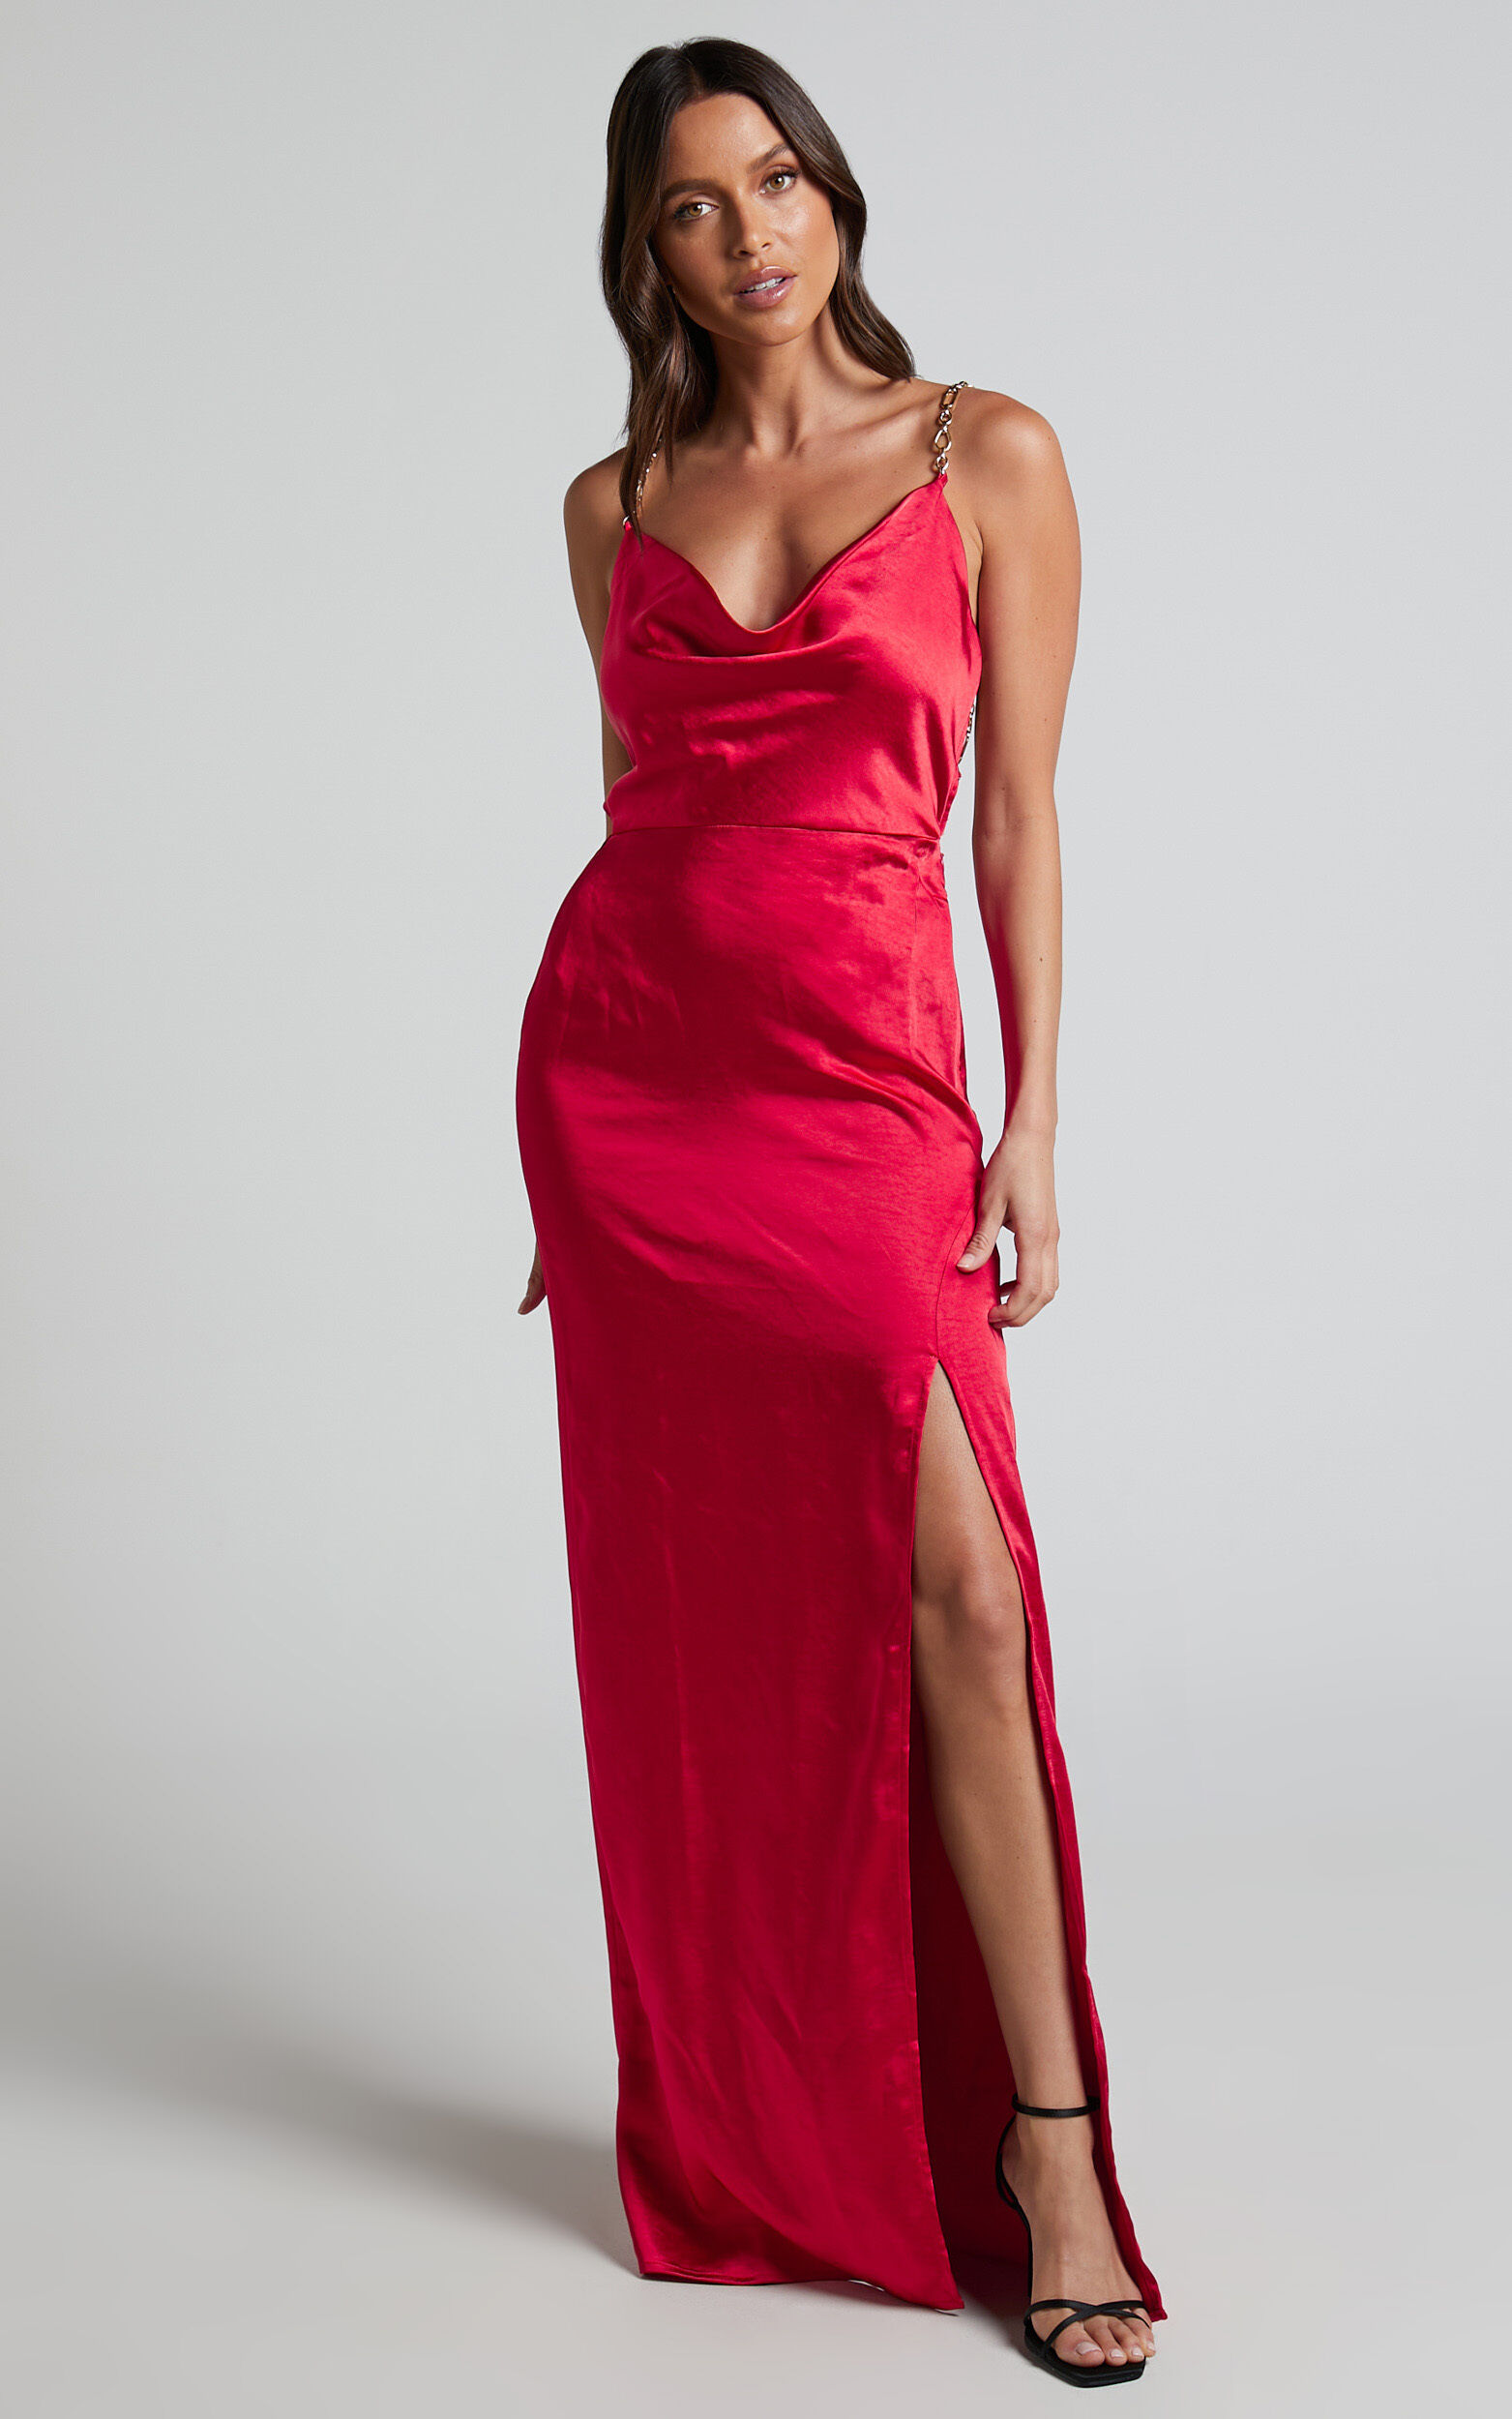 Bravia Maxi Dress - Chain Strap Open Back Satin Dress in Red - 06, RED2